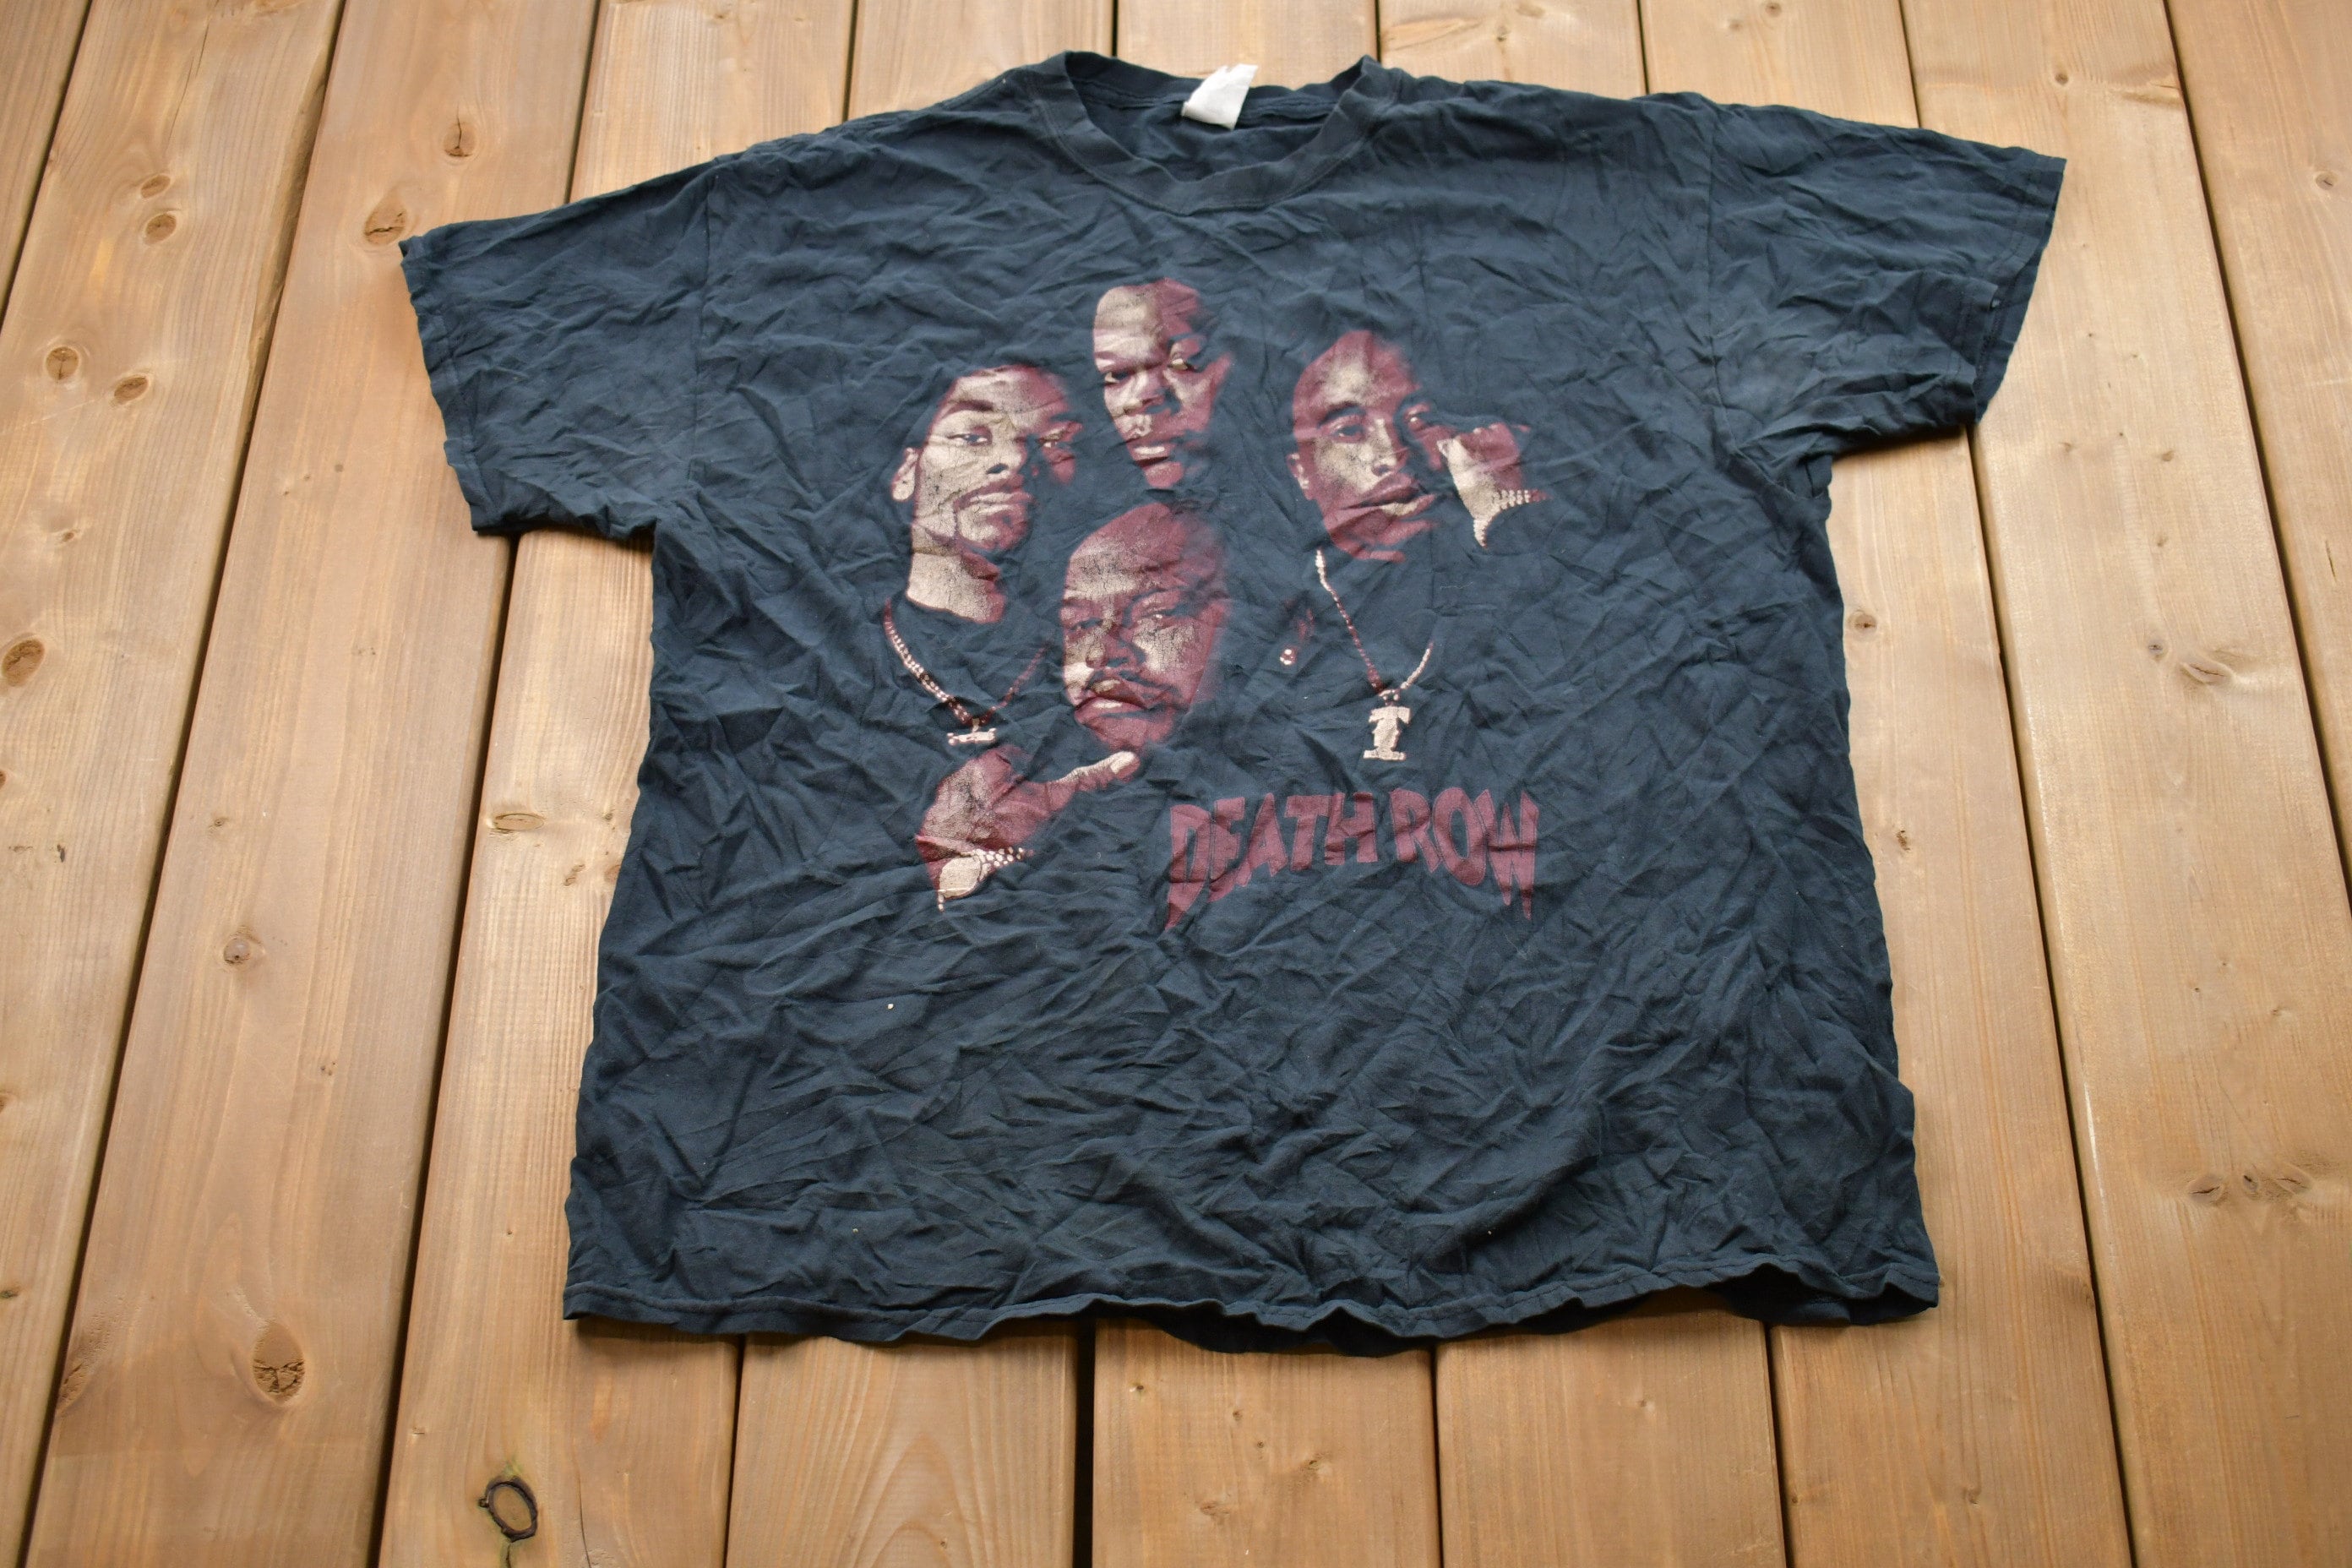 Vintage 1990s Death Row Records Graphic T-Shirt / Graphic / 80s